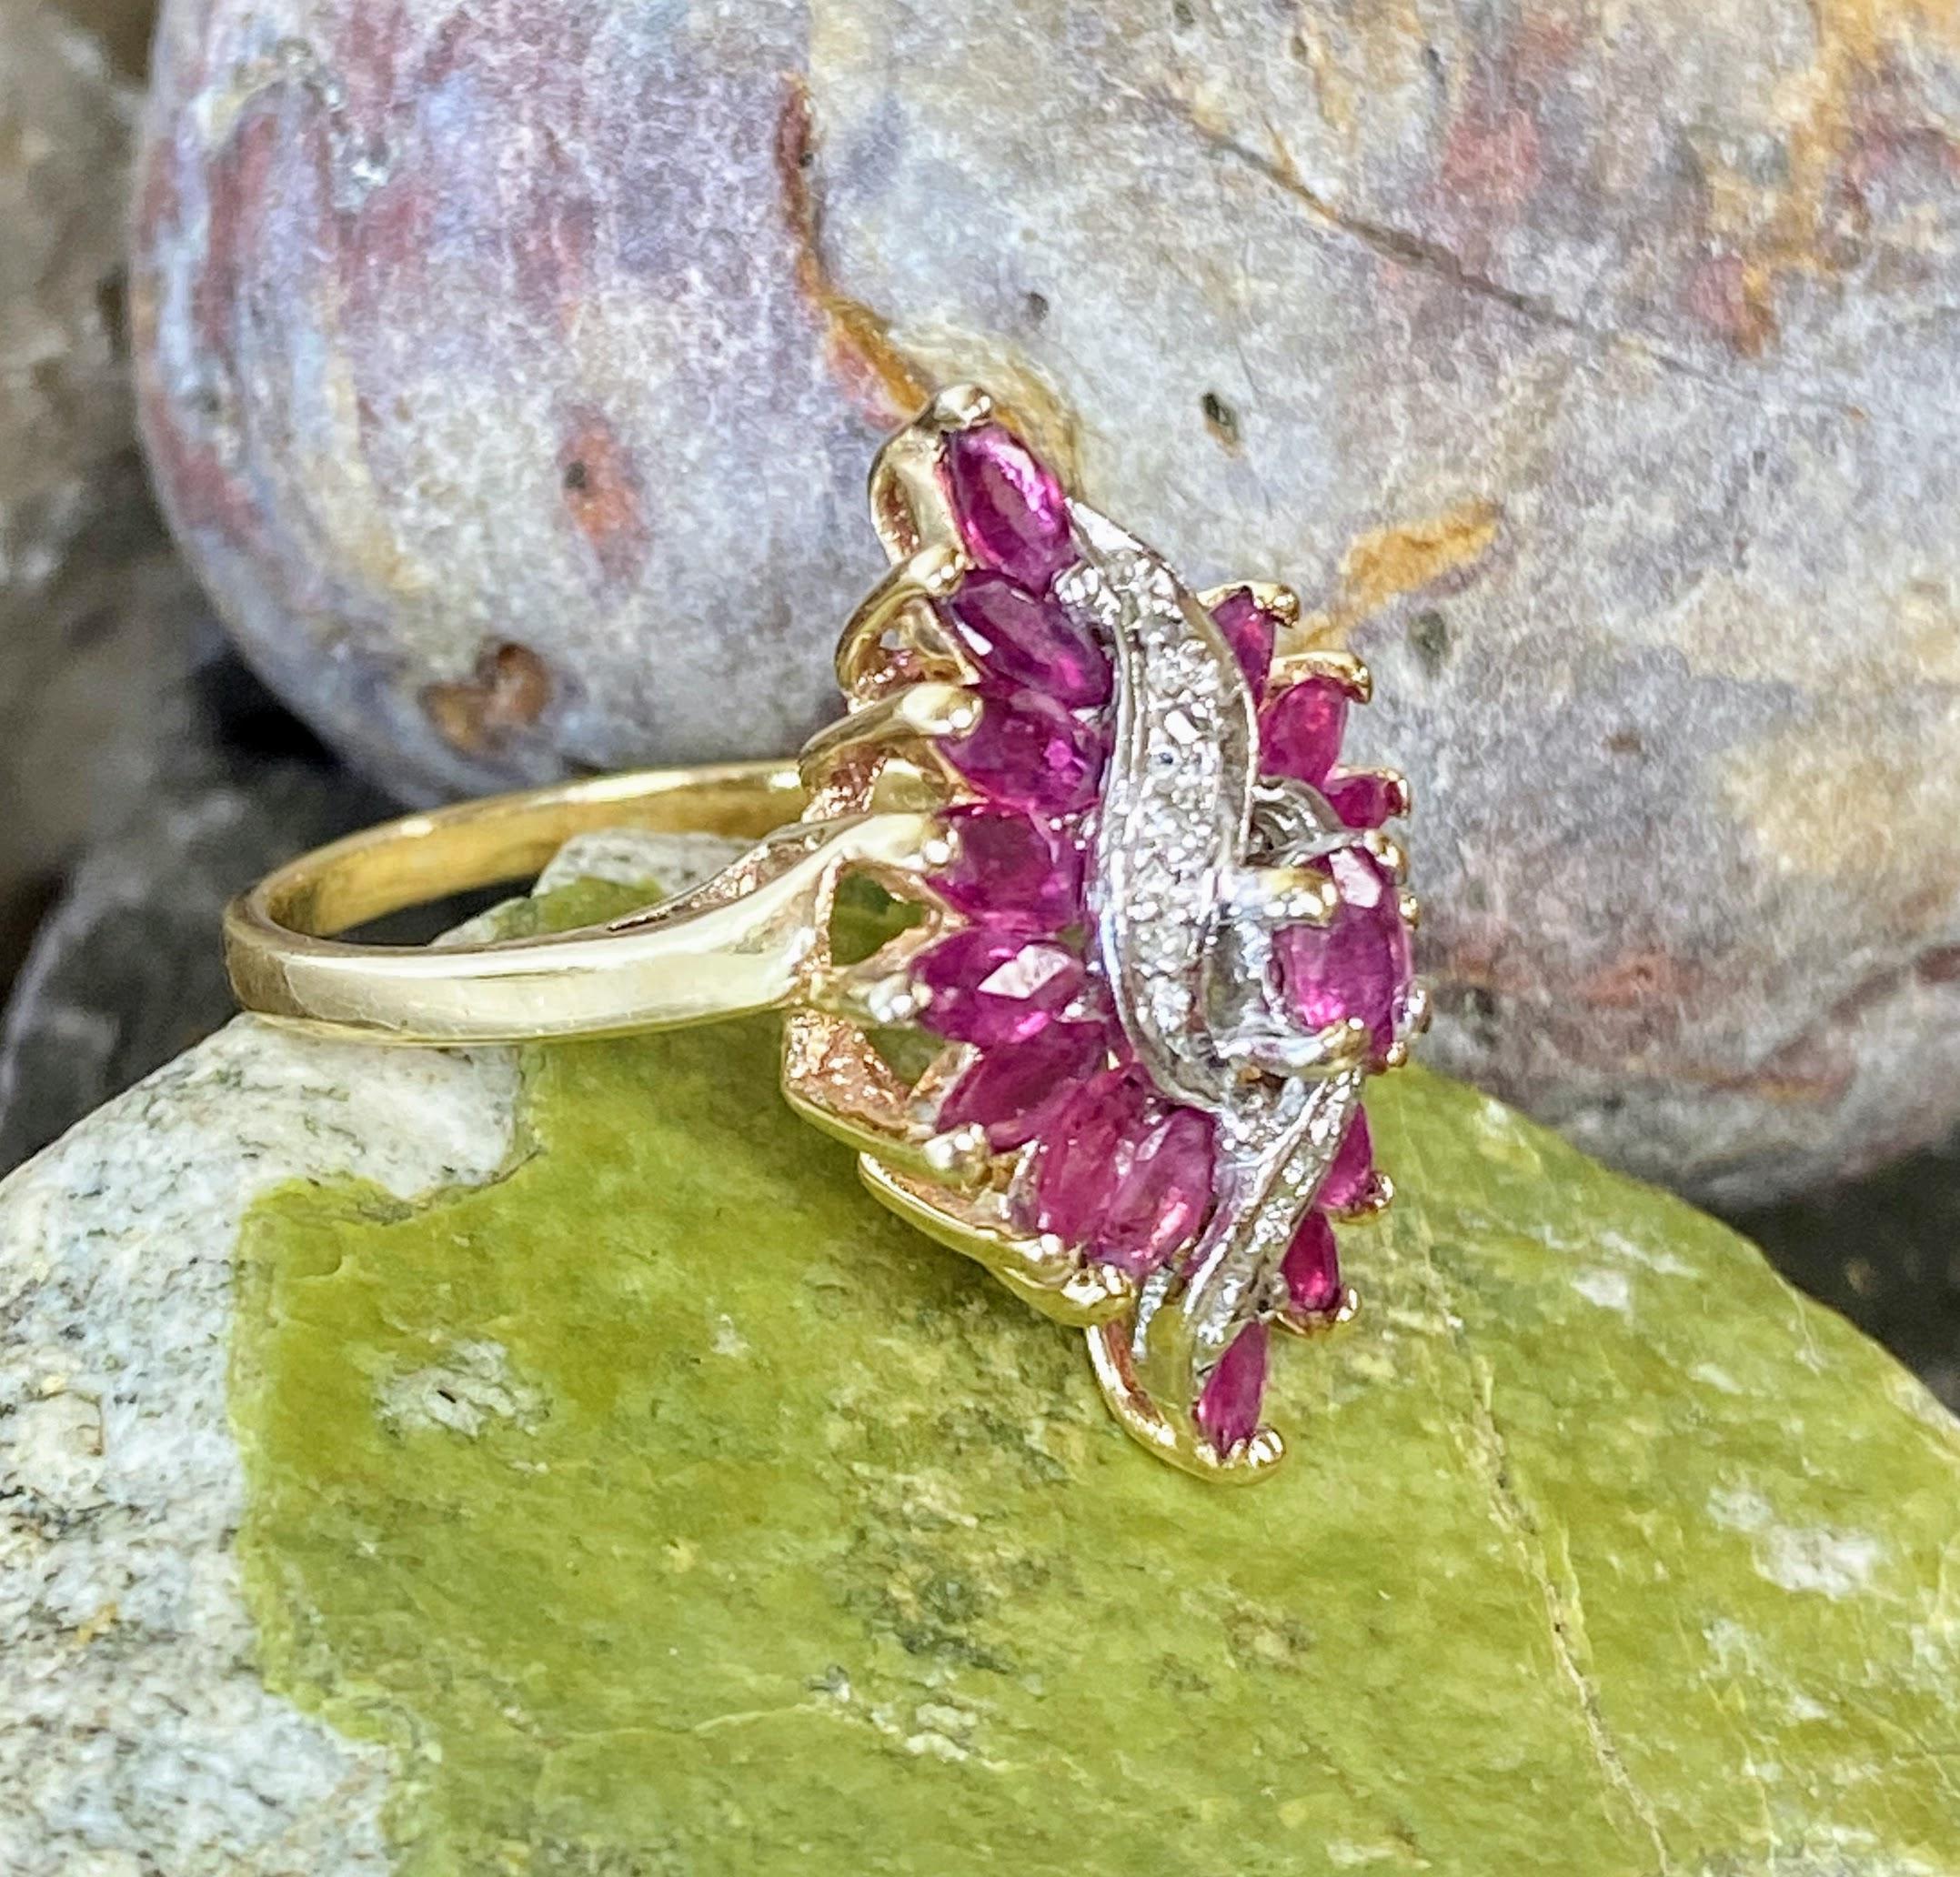 This is a gorgeous marquise ruby and diamond waterfall ballerina Ring. The a ring is centered with an oval faceted ruby. The ring cascades down with an undulating halo of 16 marquise cut rubies. The rubies are highlighted by ribbons of diamonds set